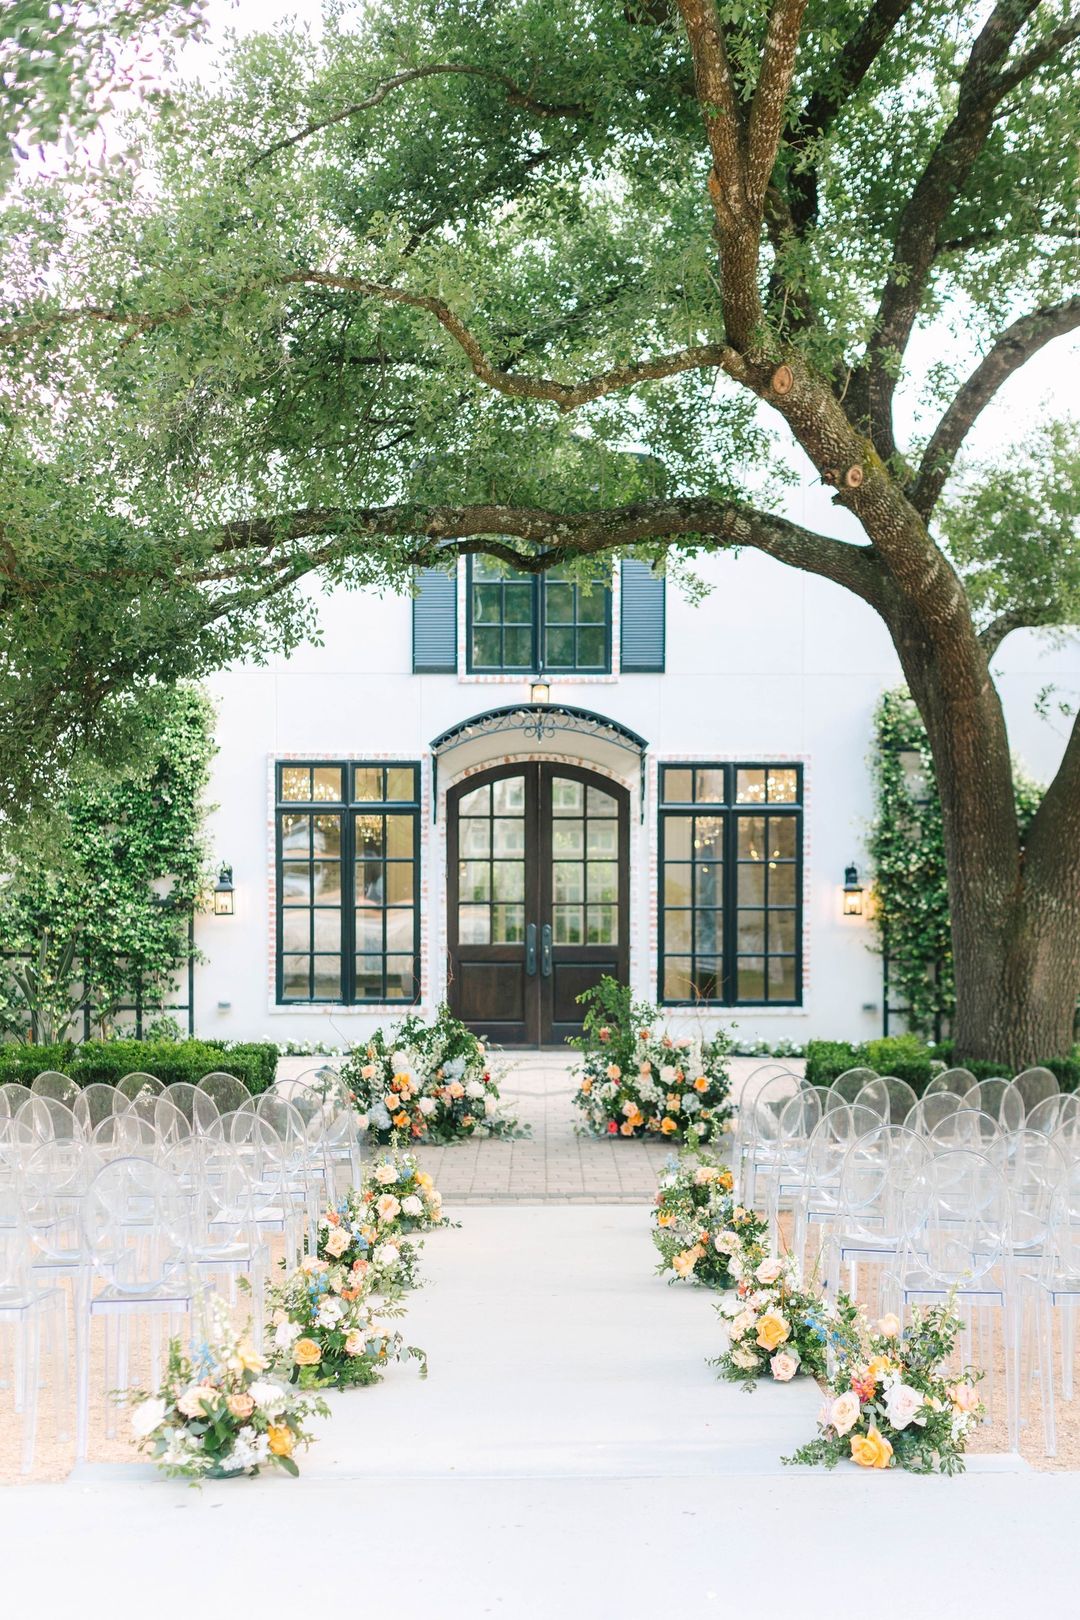 The Peach Orchard   wedding venues in Conroe, TX